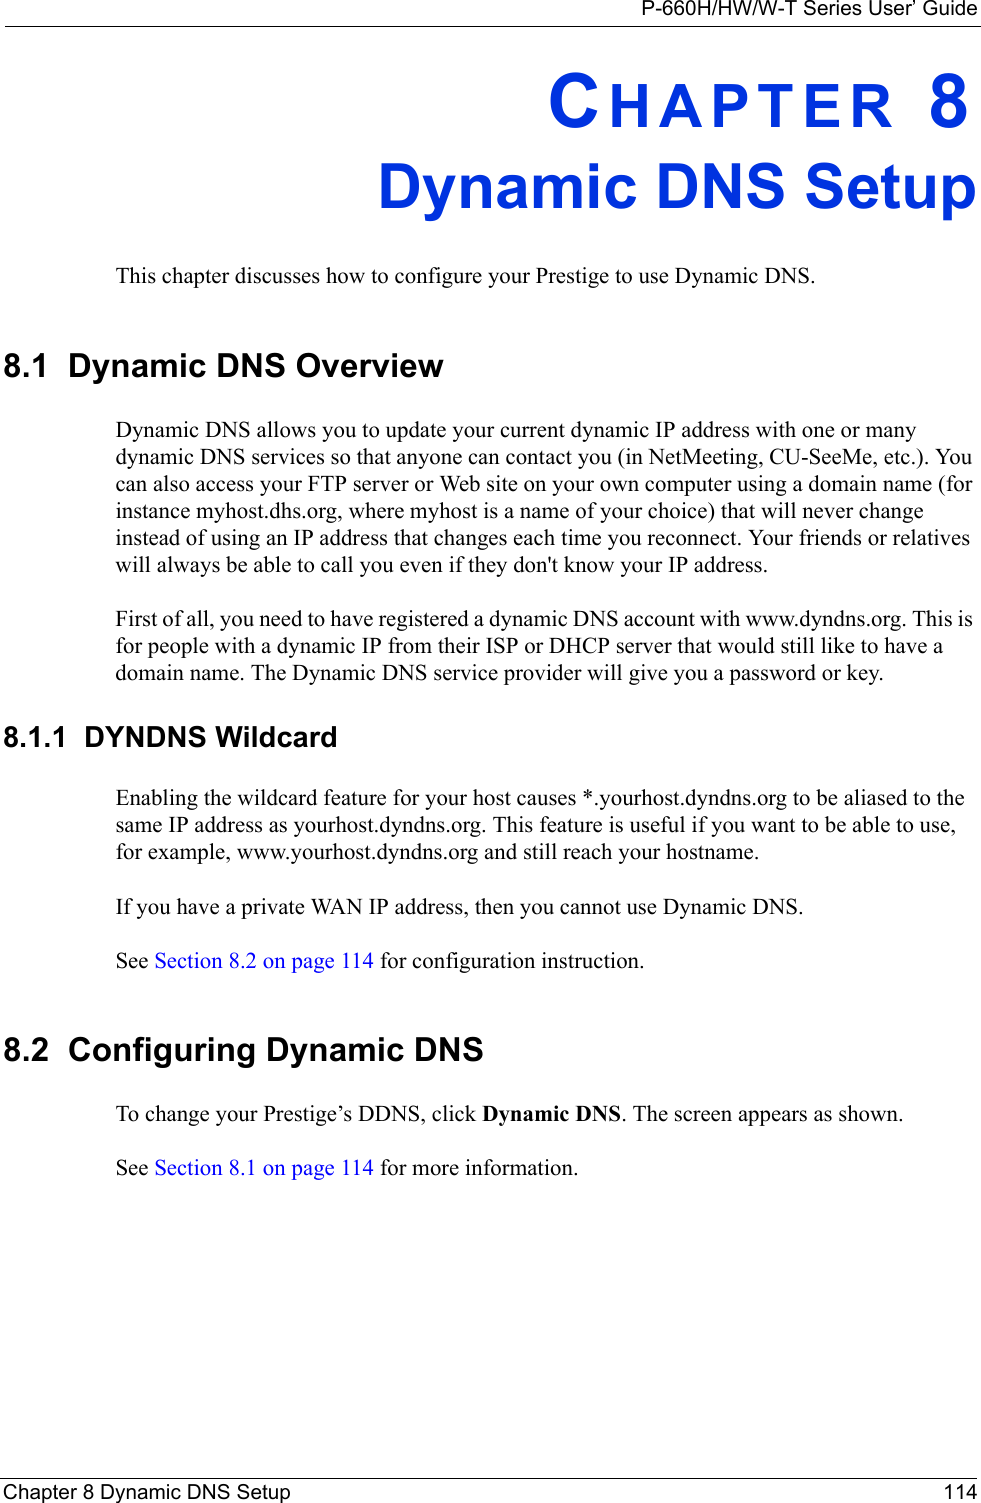 P-660H/HW/W-T Series User’ GuideChapter 8 Dynamic DNS Setup 114CHAPTER 8Dynamic DNS SetupThis chapter discusses how to configure your Prestige to use Dynamic DNS.8.1  Dynamic DNS Overview  Dynamic DNS allows you to update your current dynamic IP address with one or many dynamic DNS services so that anyone can contact you (in NetMeeting, CU-SeeMe, etc.). You can also access your FTP server or Web site on your own computer using a domain name (for instance myhost.dhs.org, where myhost is a name of your choice) that will never change instead of using an IP address that changes each time you reconnect. Your friends or relatives will always be able to call you even if they don&apos;t know your IP address.First of all, you need to have registered a dynamic DNS account with www.dyndns.org. This is for people with a dynamic IP from their ISP or DHCP server that would still like to have a domain name. The Dynamic DNS service provider will give you a password or key. 8.1.1  DYNDNS WildcardEnabling the wildcard feature for your host causes *.yourhost.dyndns.org to be aliased to the same IP address as yourhost.dyndns.org. This feature is useful if you want to be able to use, for example, www.yourhost.dyndns.org and still reach your hostname.If you have a private WAN IP address, then you cannot use Dynamic DNS.See Section 8.2 on page 114 for configuration instruction. 8.2  Configuring Dynamic DNS To change your Prestige’s DDNS, click Dynamic DNS. The screen appears as shown.See Section 8.1 on page 114 for more information. 